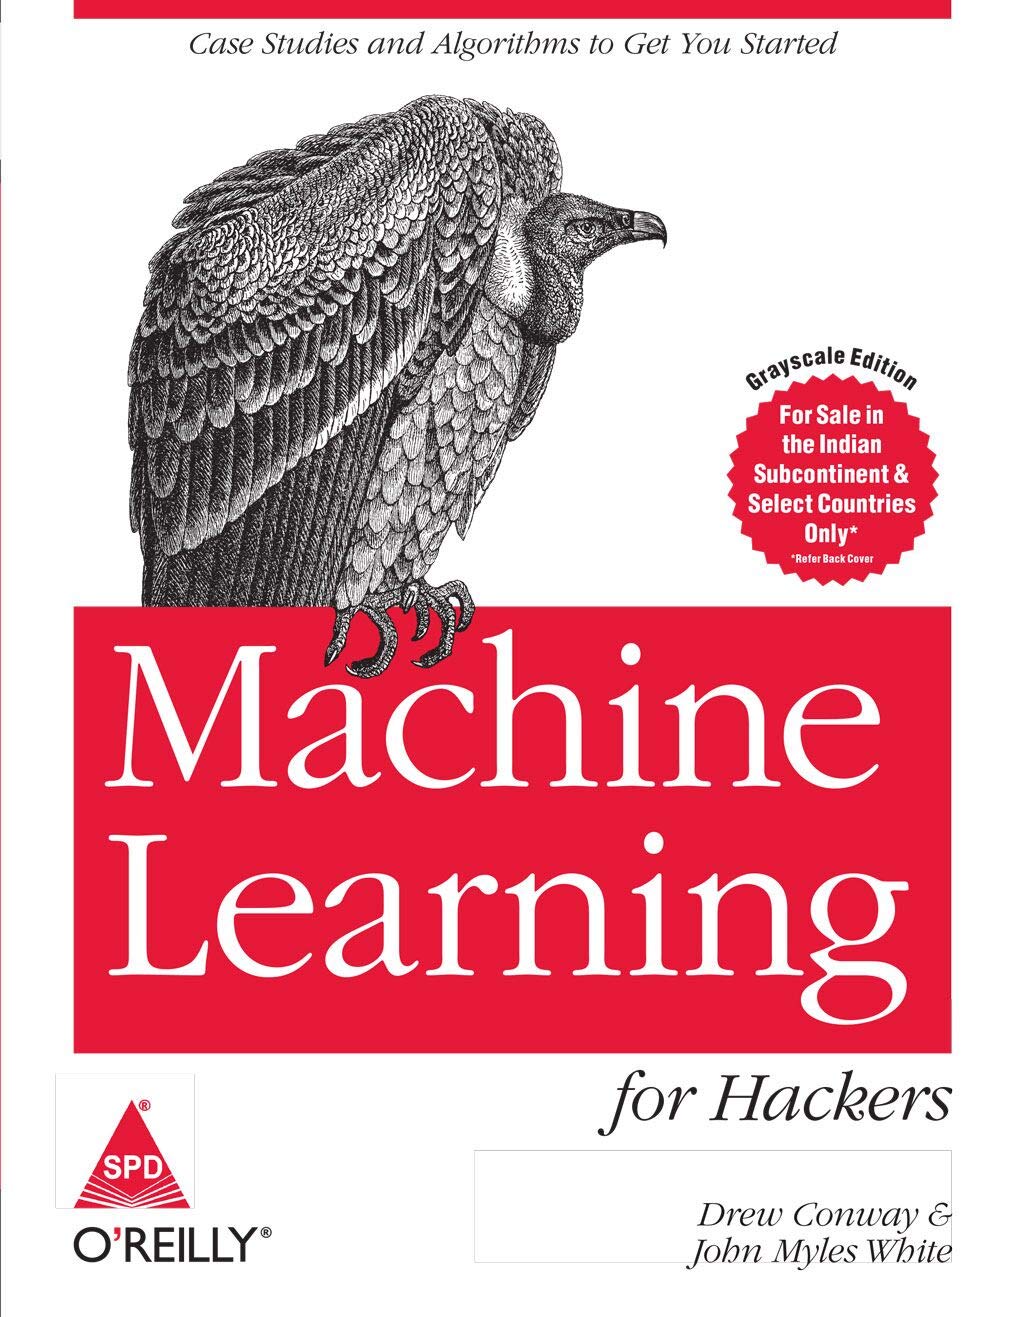 Machine Learning for Hackers_ Case Studies and Algorithms to Get You Started